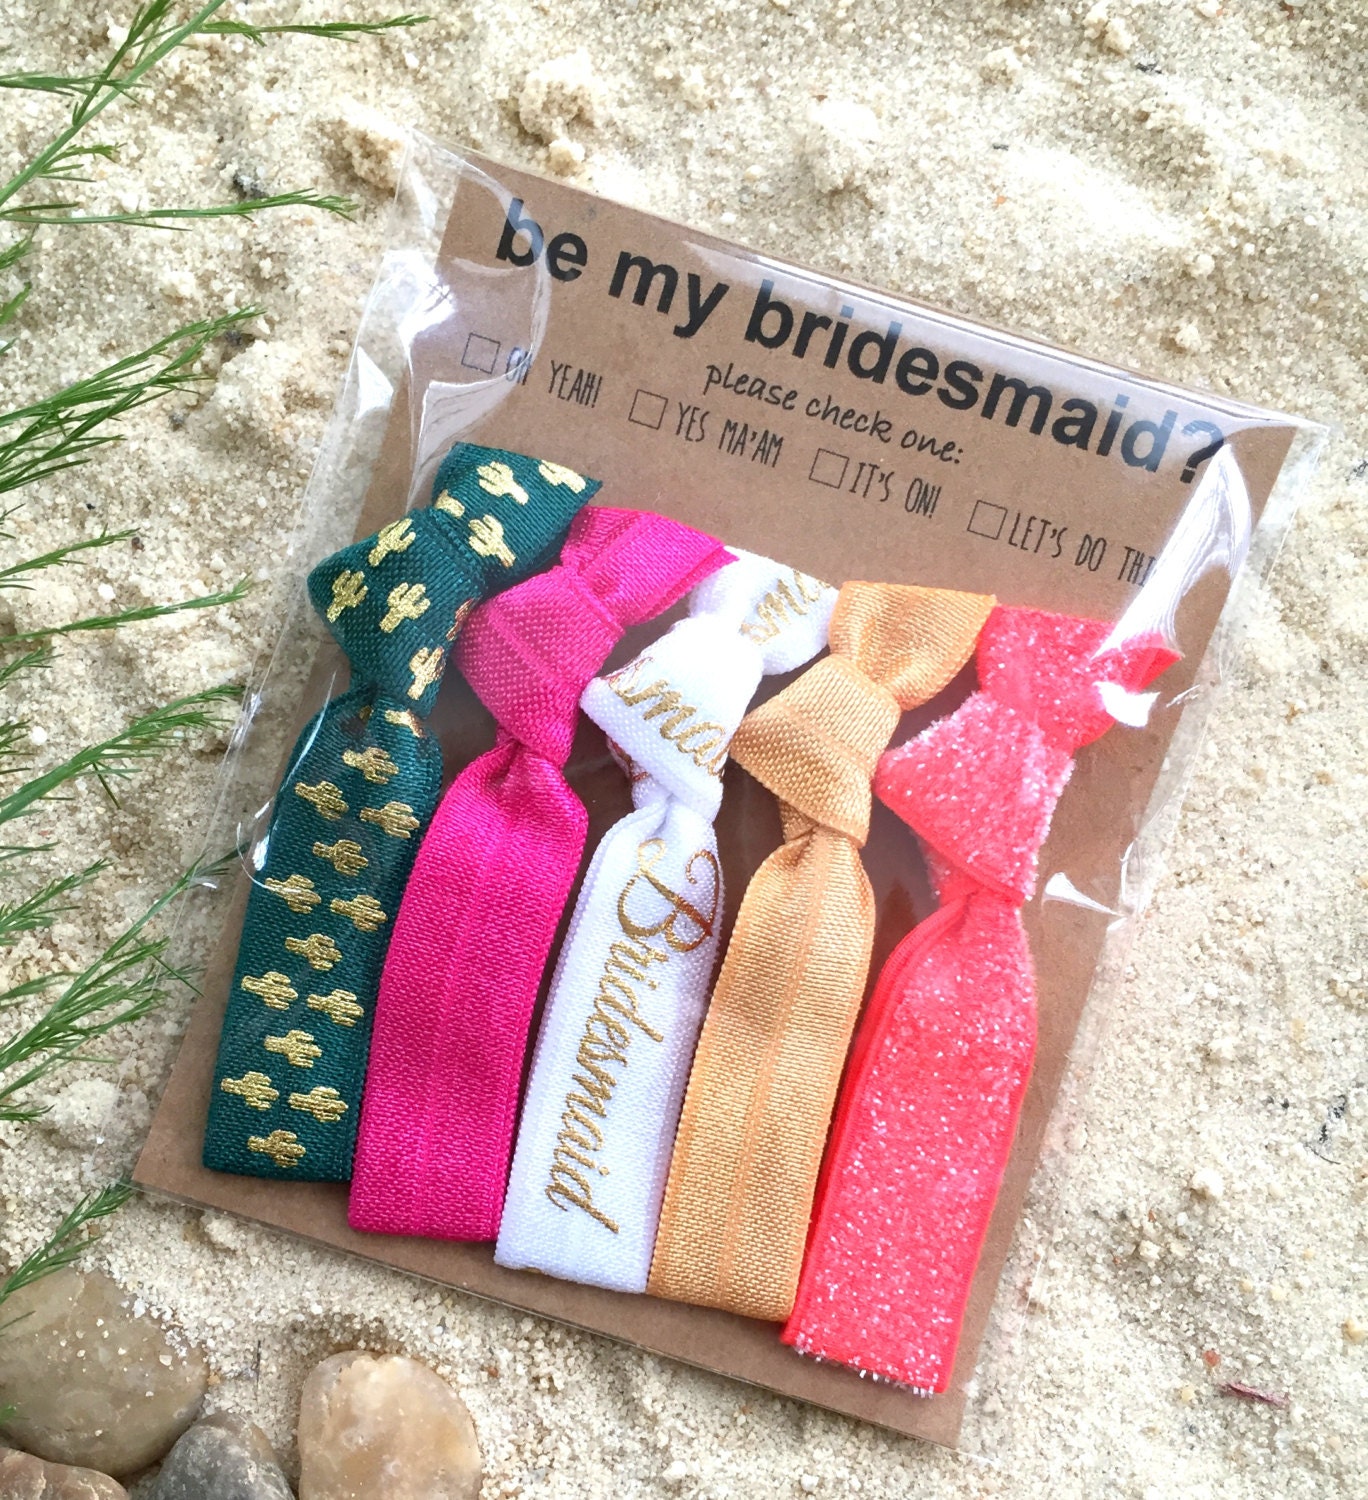 Bridesmaid Gift and Bachelorette Party Favors Sedona